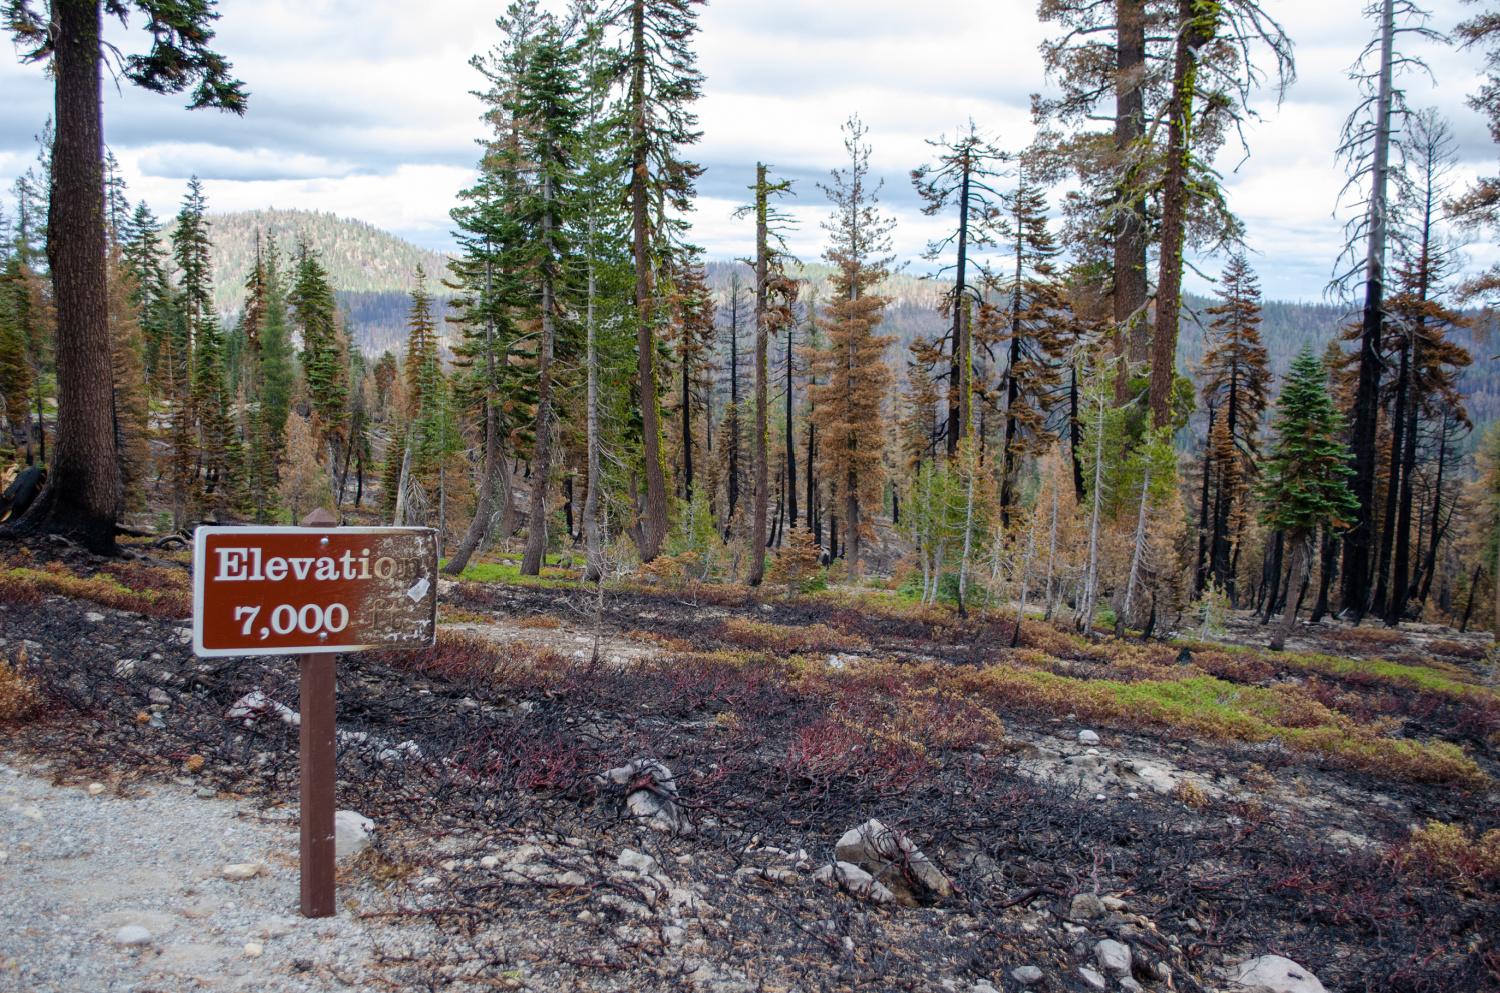 Dixie Fire aftermath in Lassen Volcanic